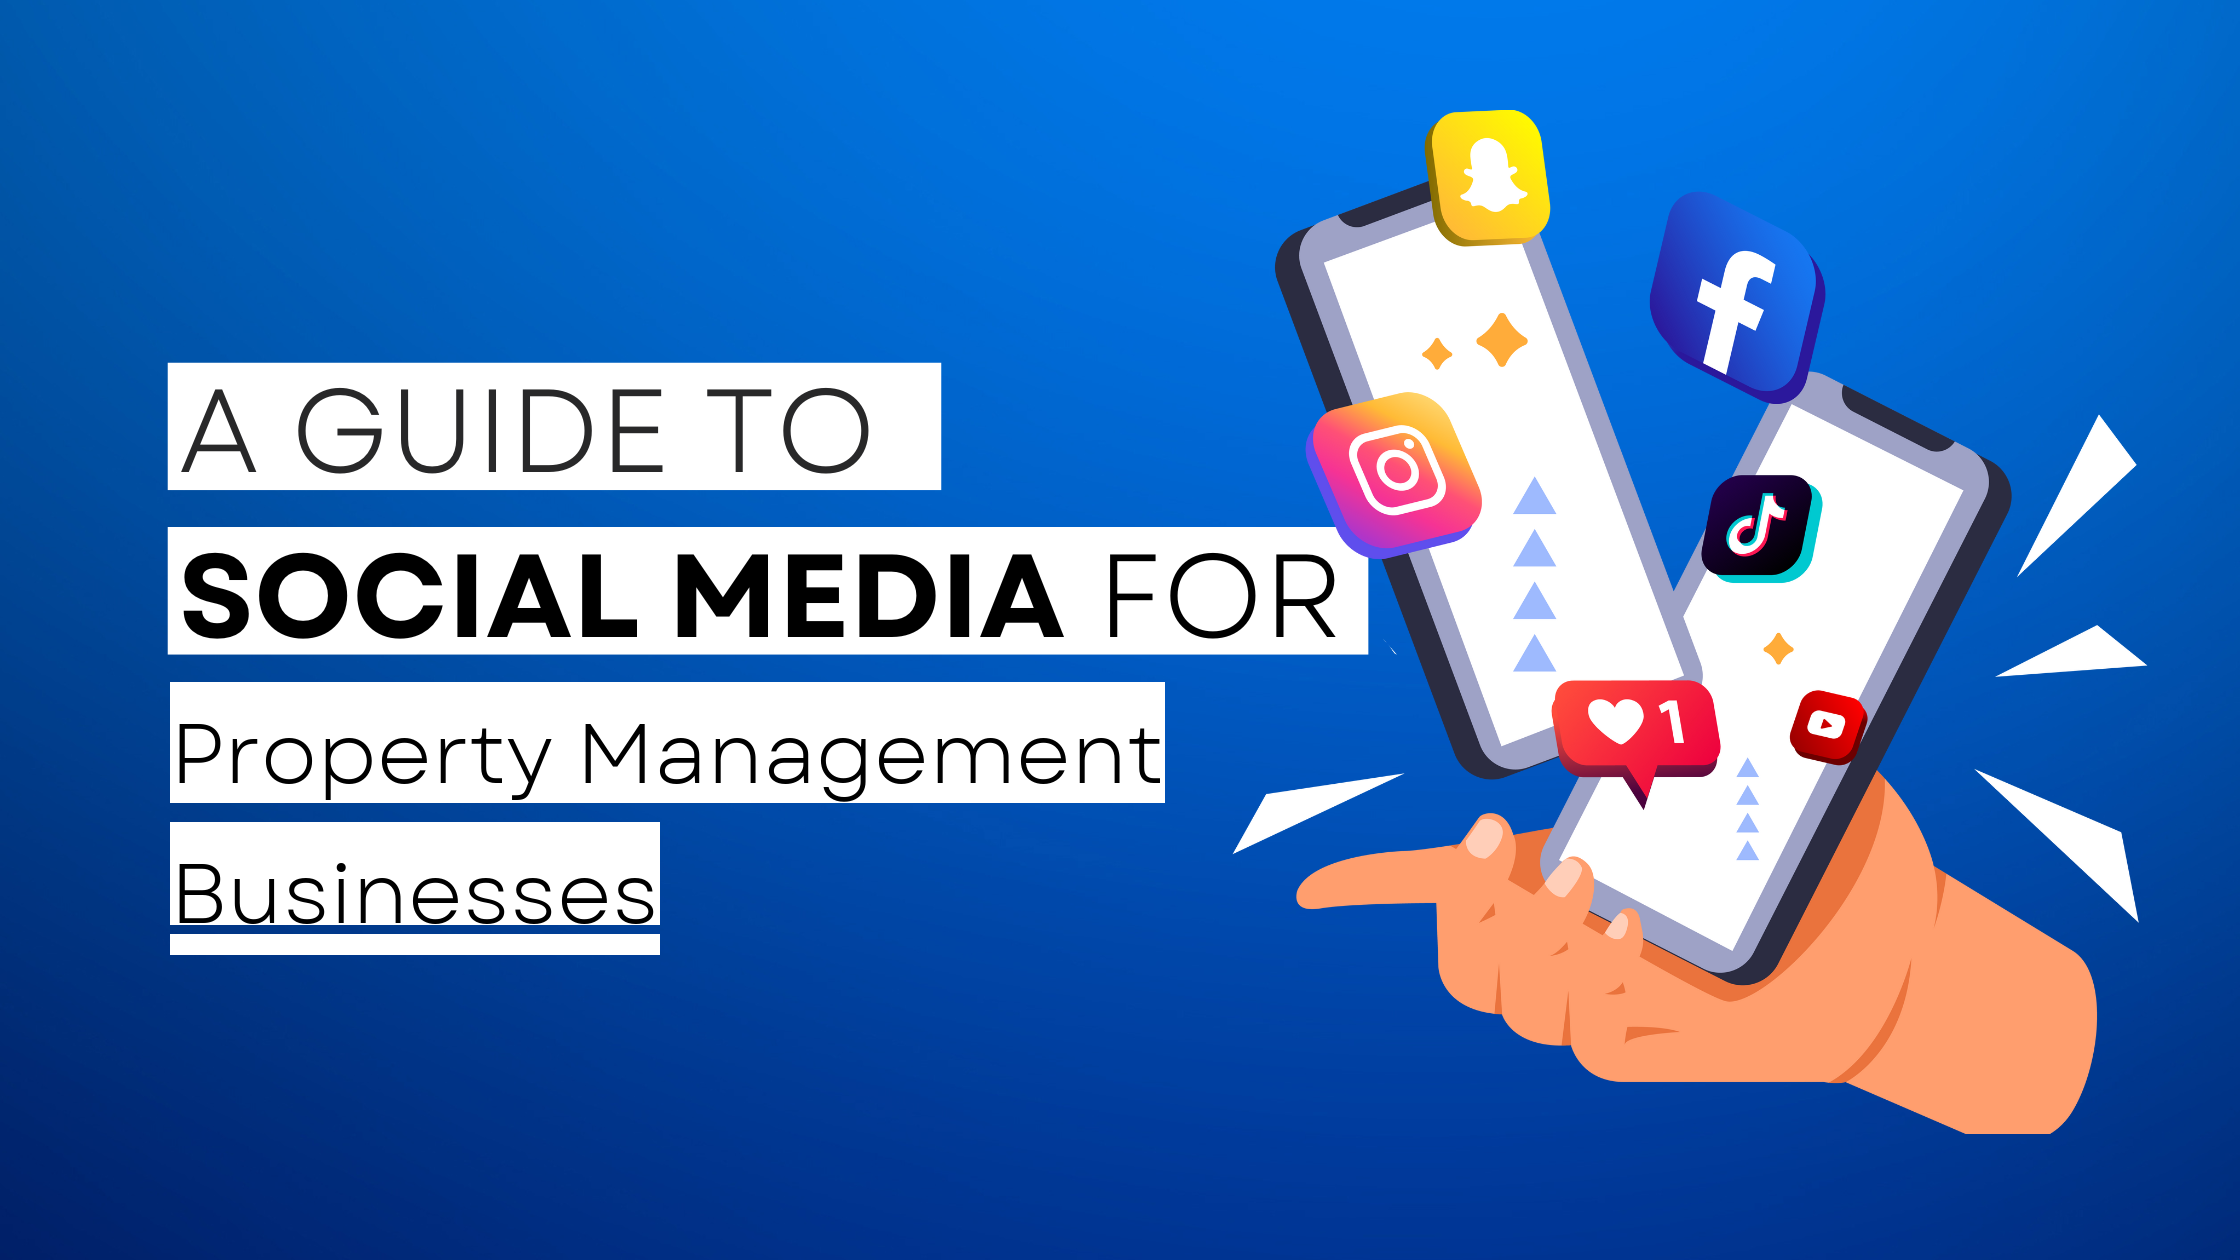 How to start Property Management on social media